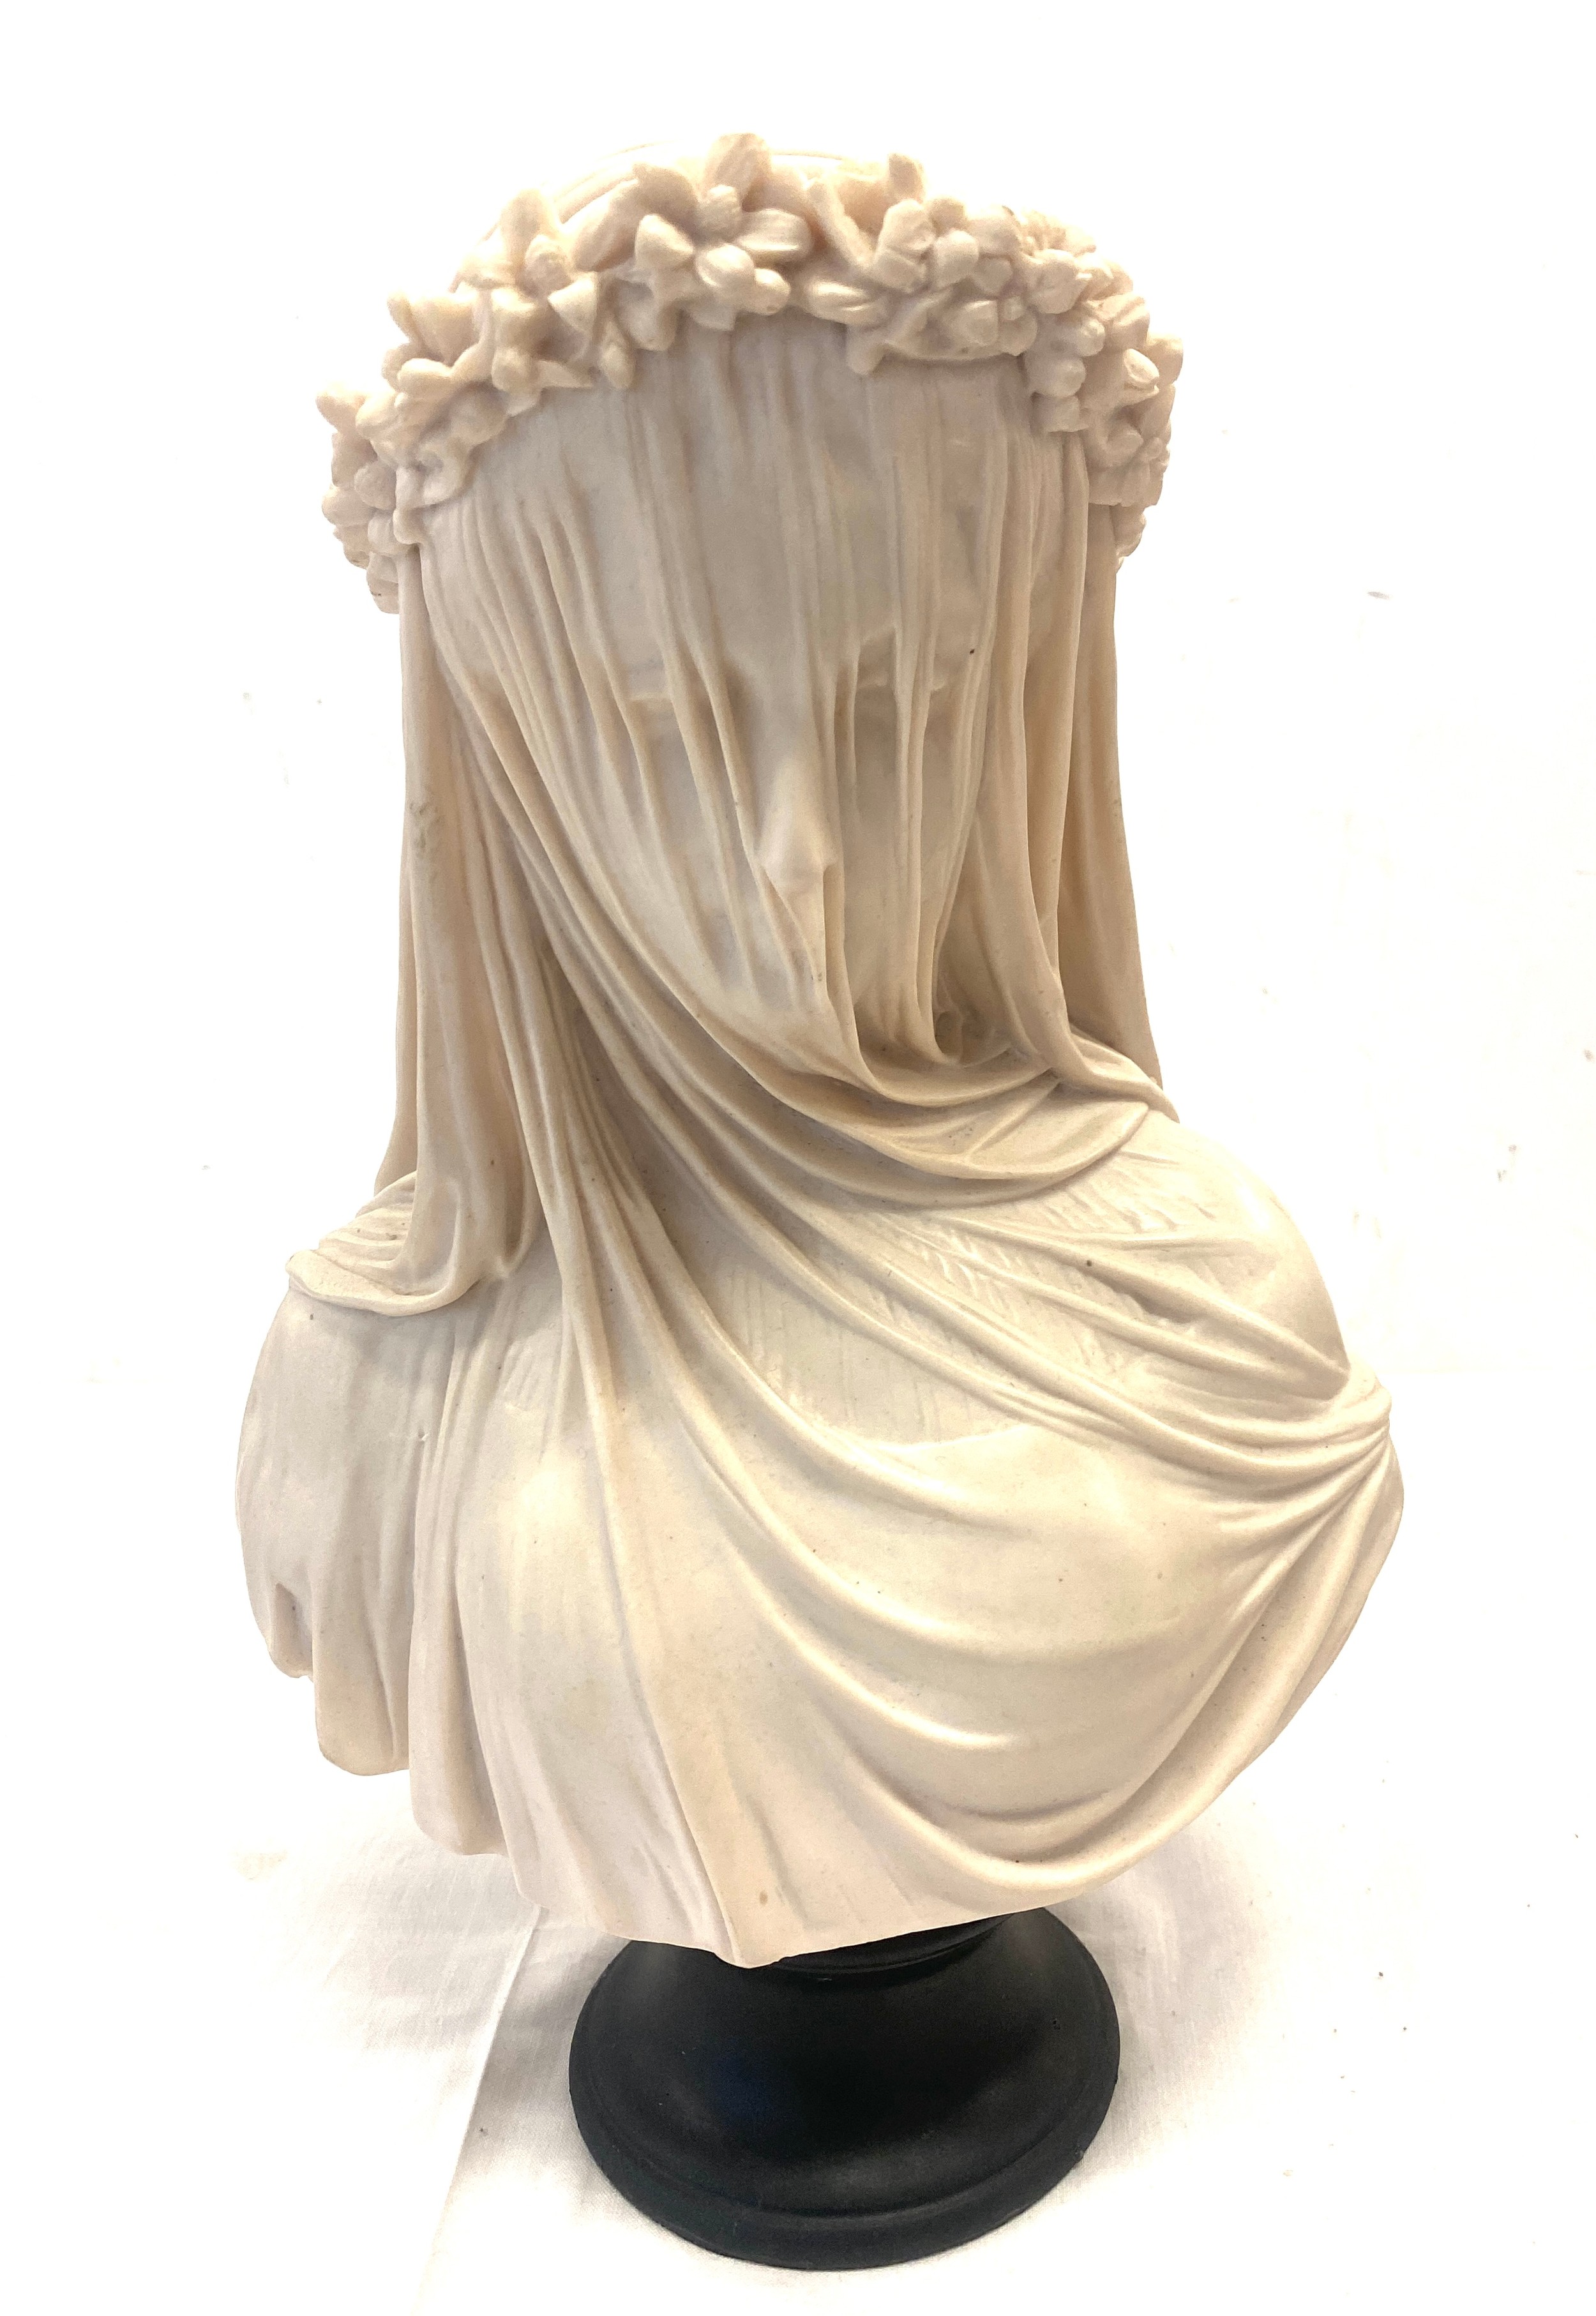 A vintage Frilli Firenze Italy lady with veil bust on plinth, overall height 14 inches